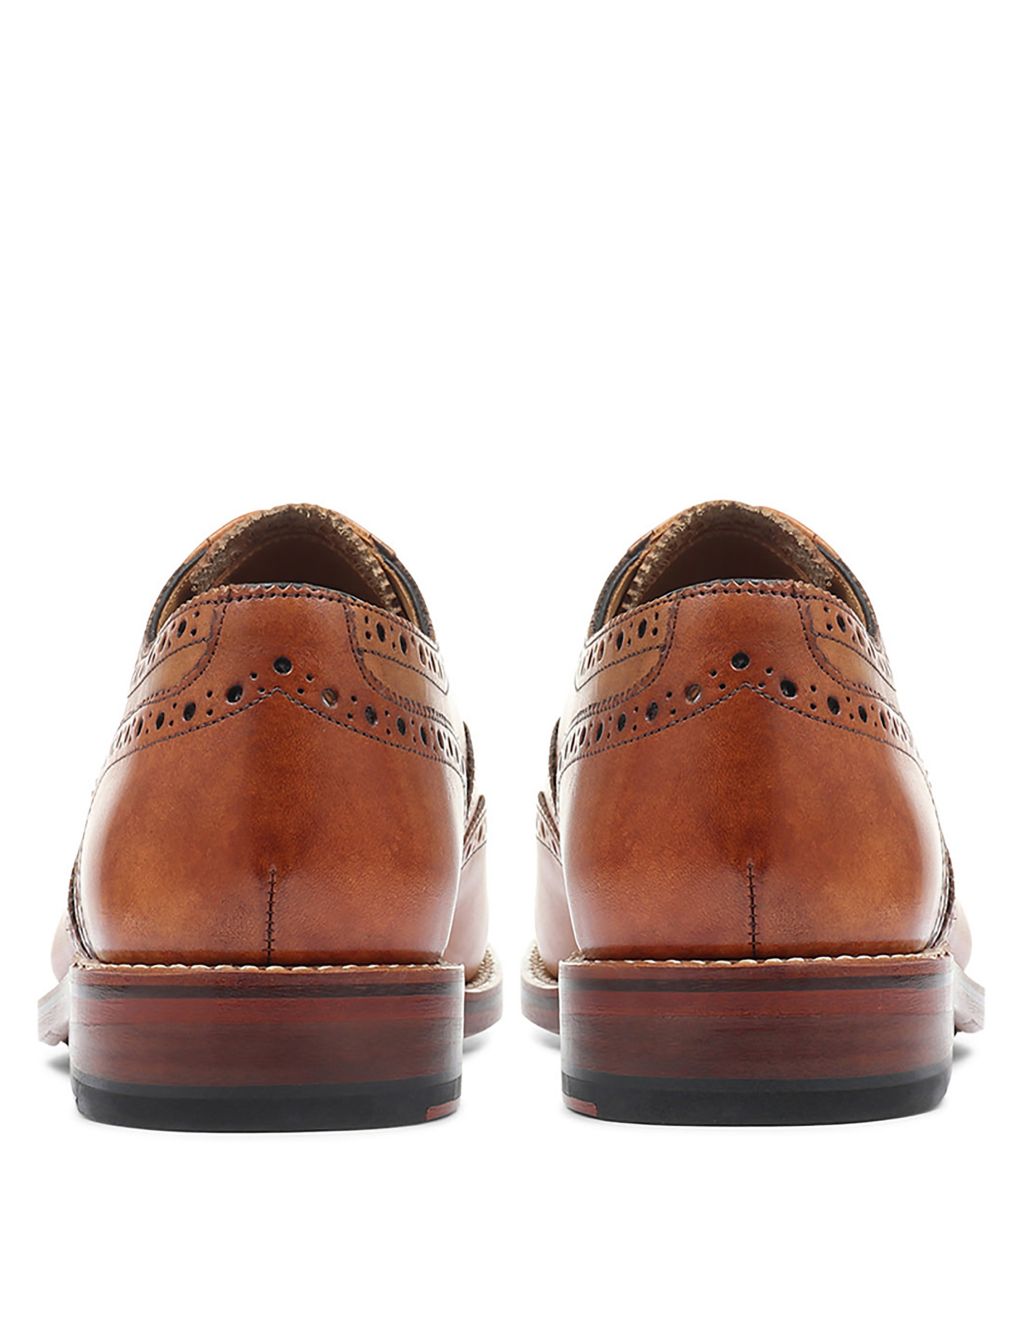 Leather Brogues image 2